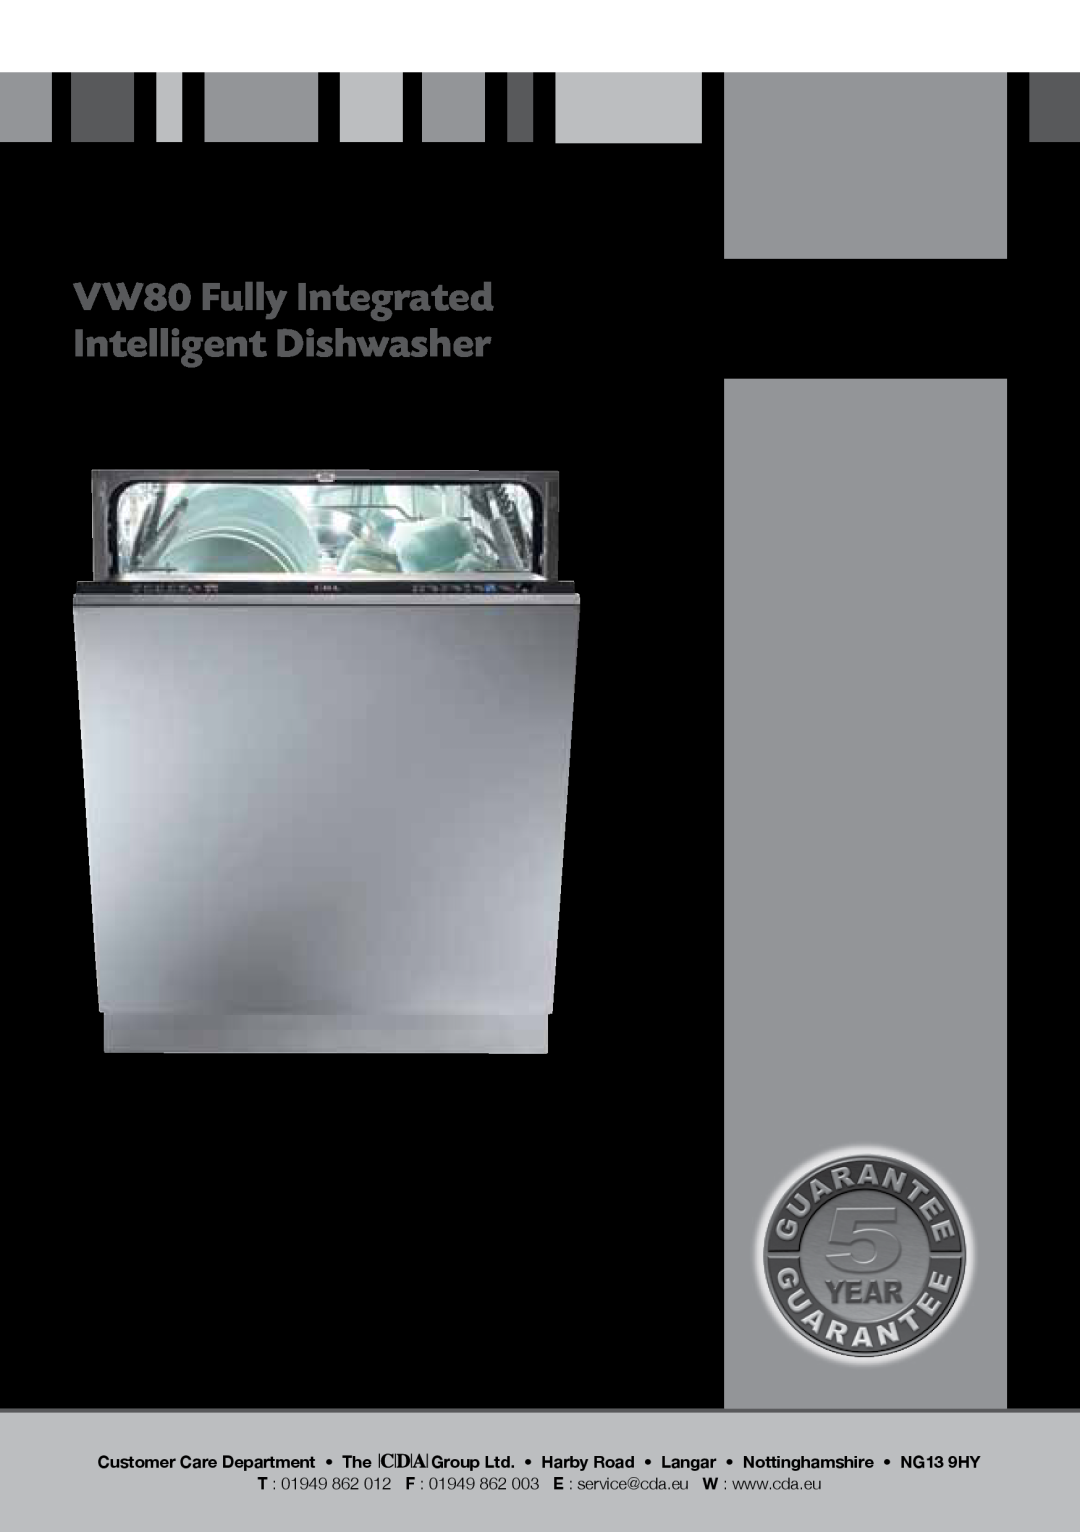 CDA manual VW80 Fully Integrated Intelligent Dishwasher, Manual for Installation, Use and Maintenance, T 